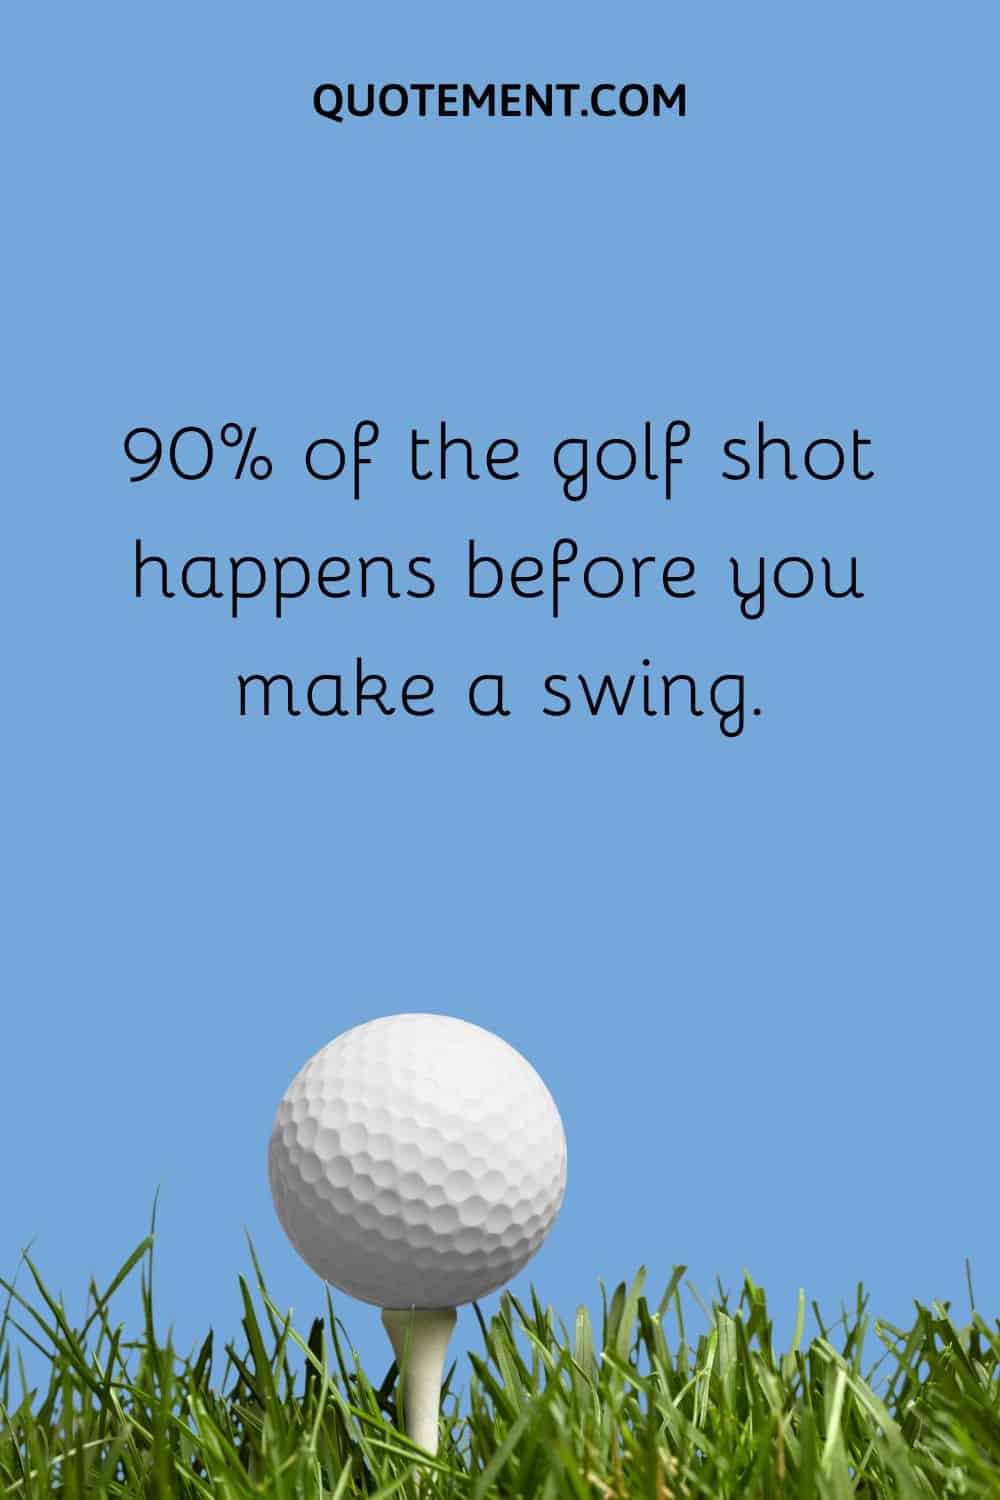 90% of the golf shot happens before you make a swing.